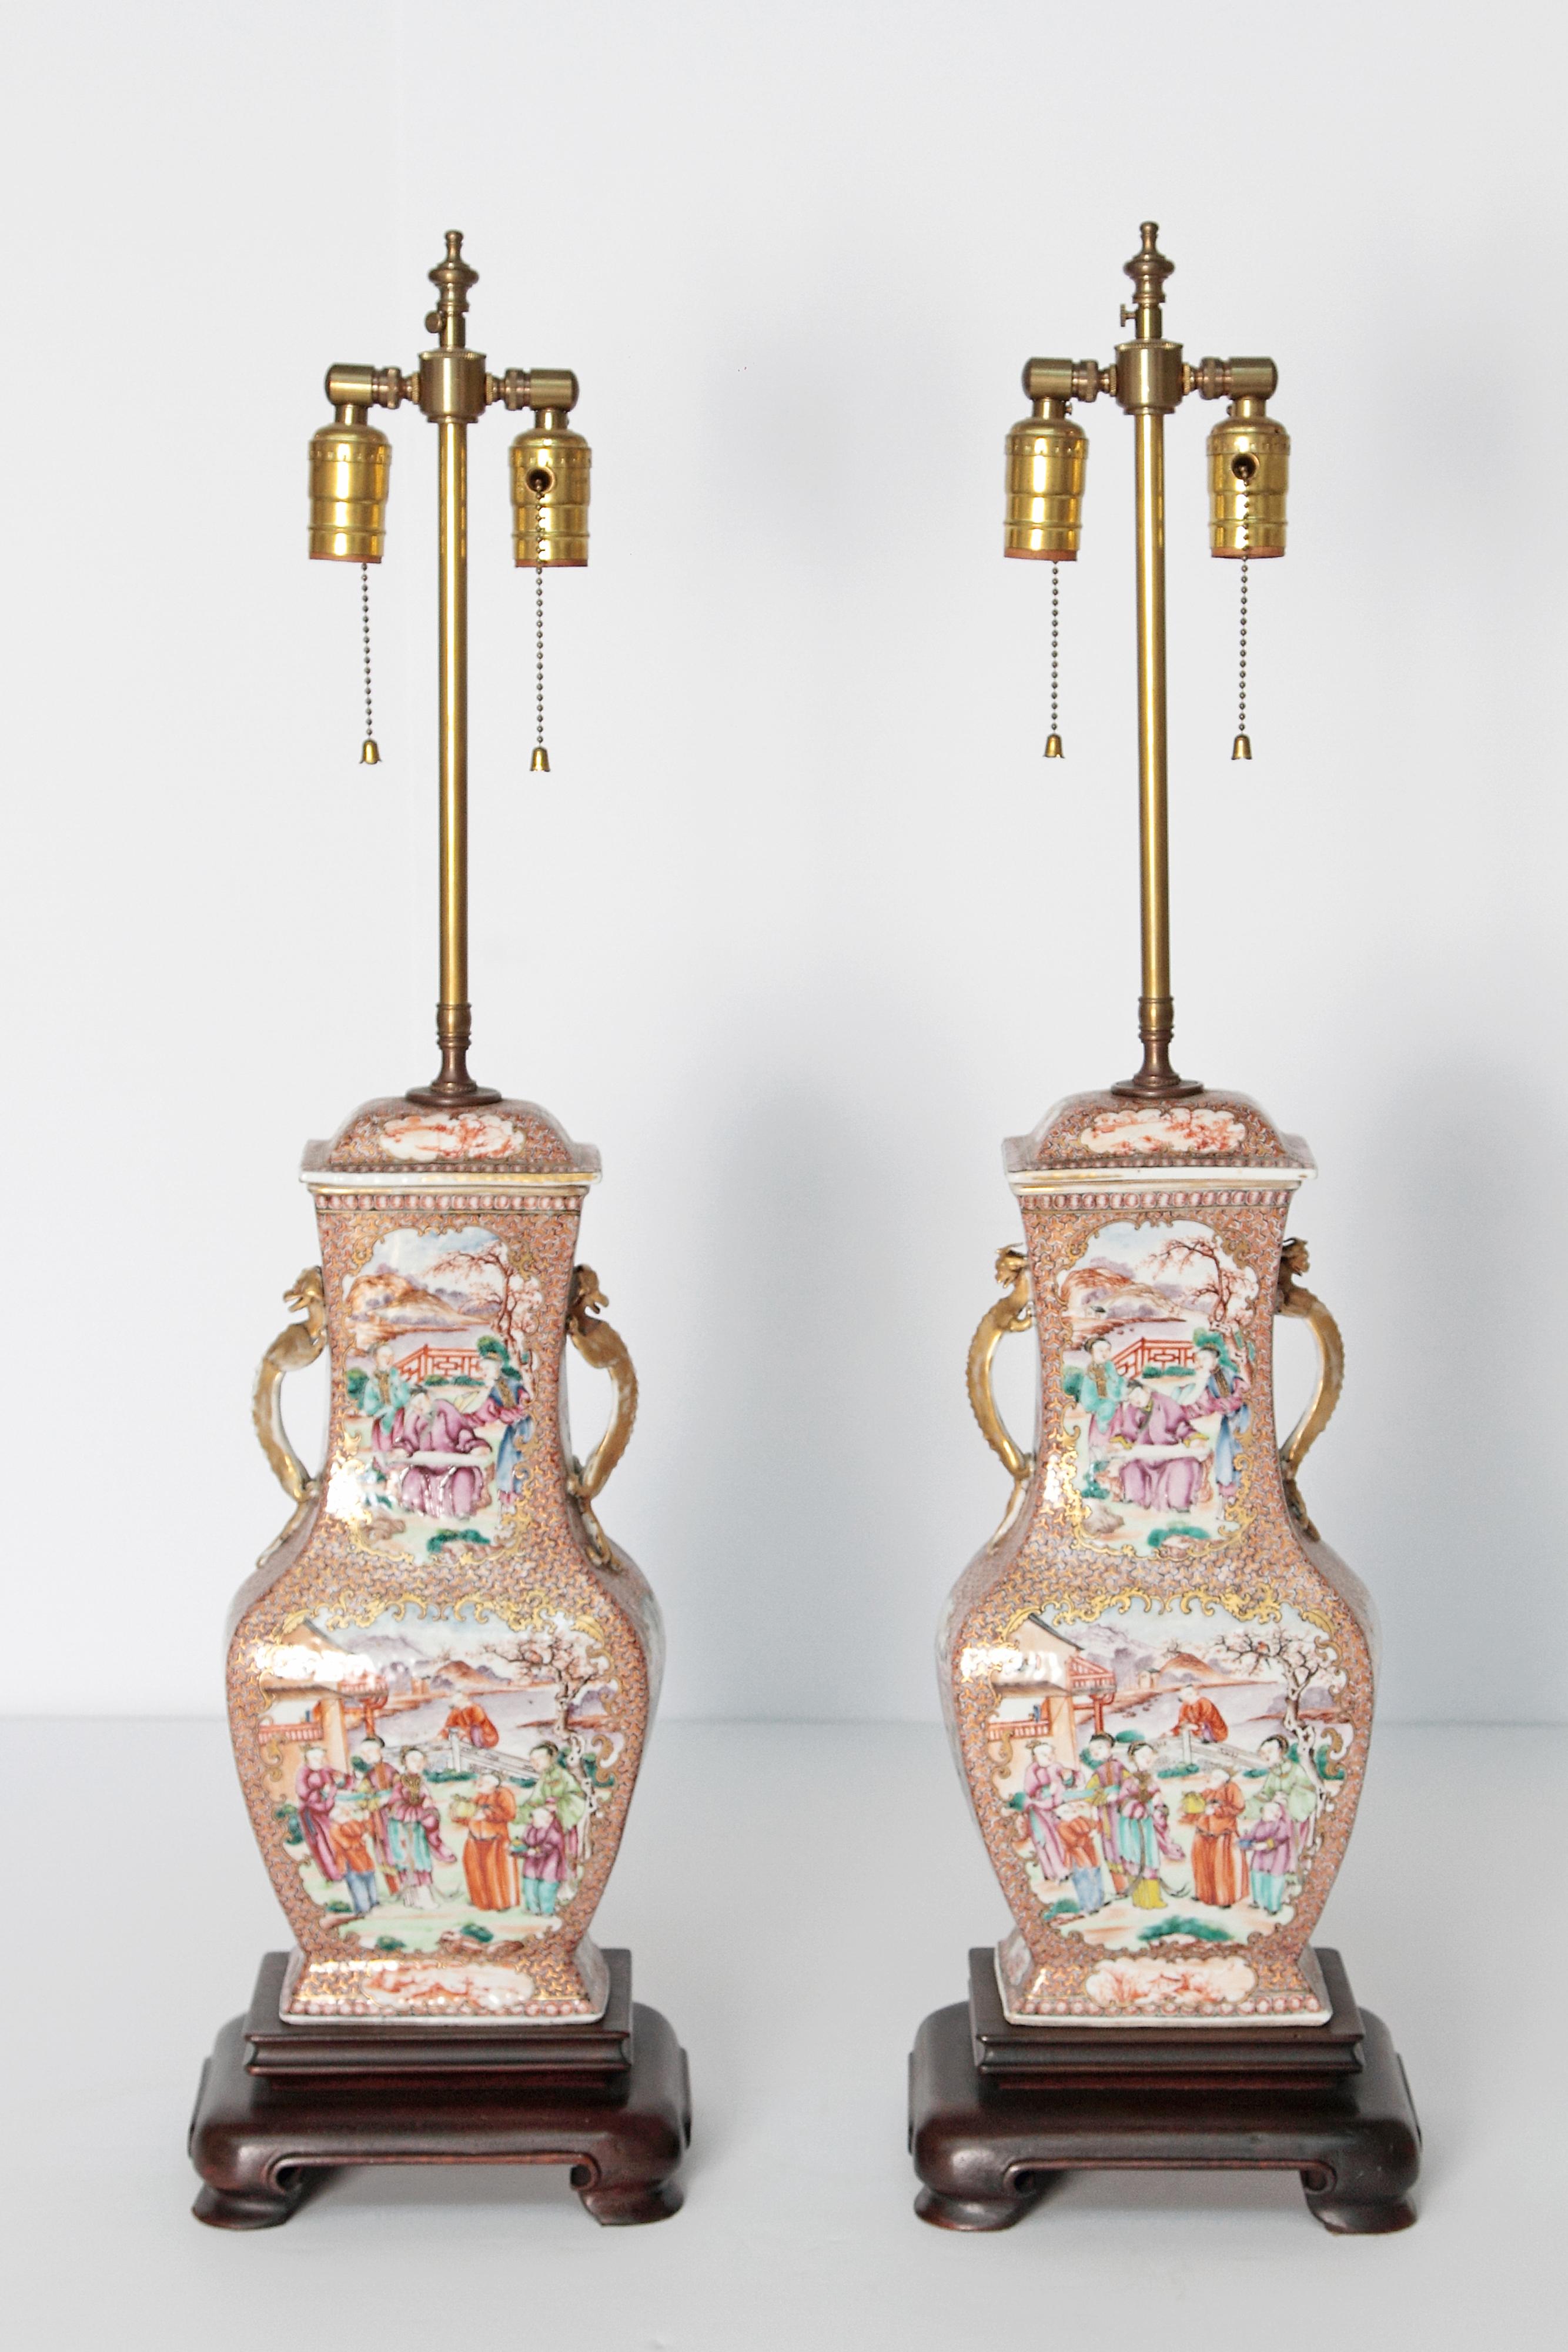 Pair of Early 19th Century Chinese Export Rose Mandarin Porcelain Jars as Lamps For Sale 6